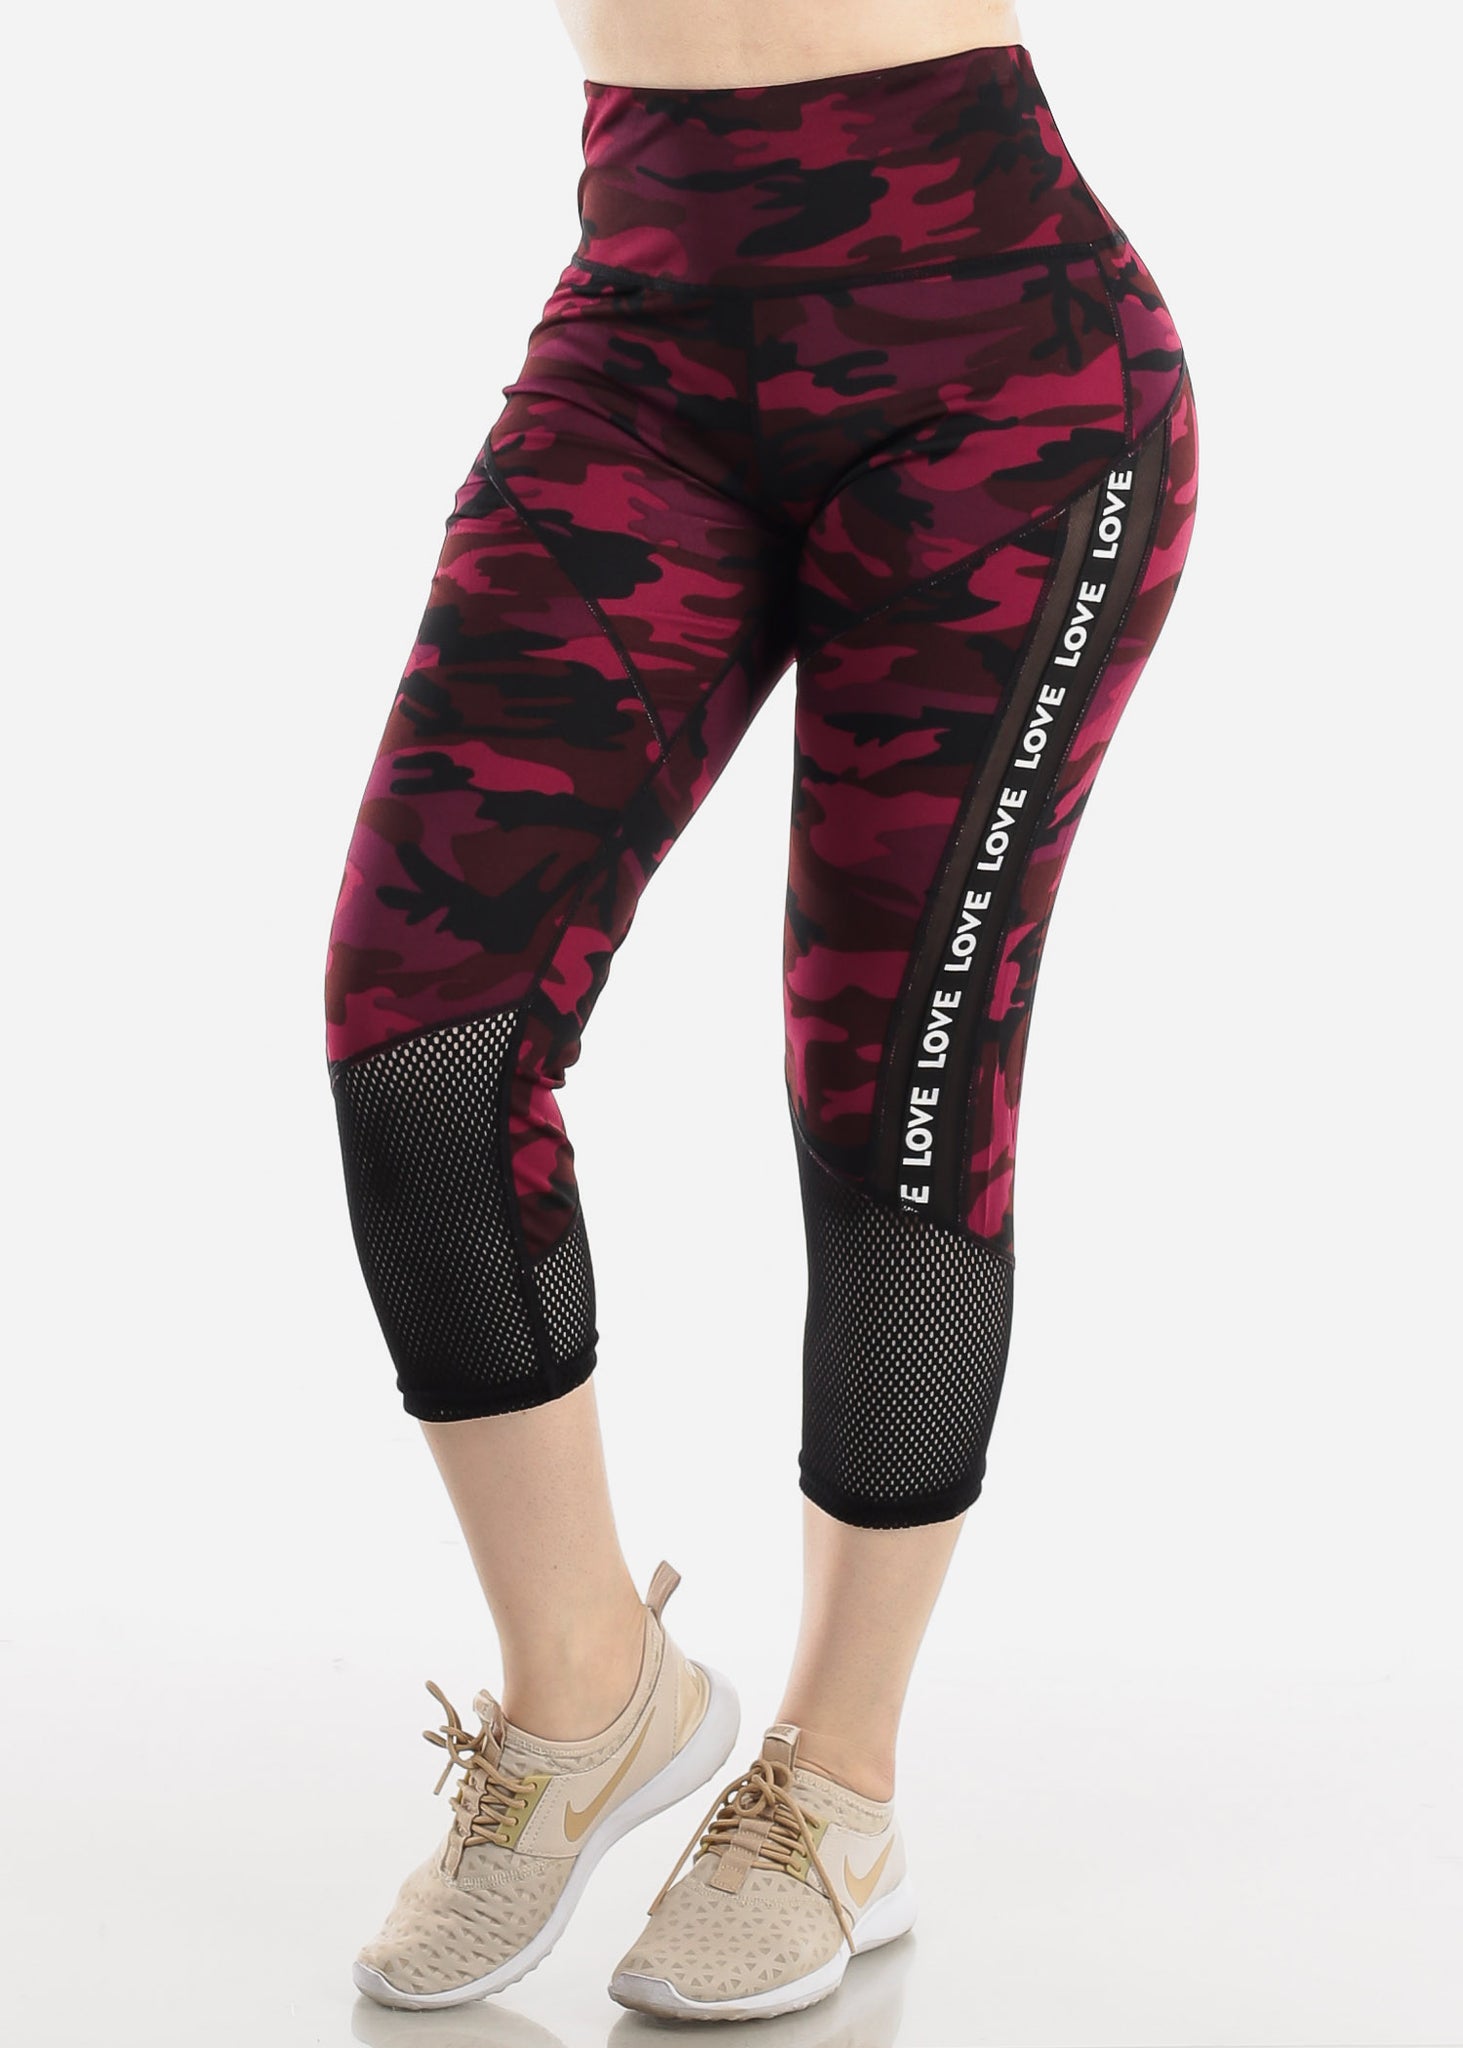 Women's Camouflage Print Red and Black Capri Leggings Y6677 – One Size Fits